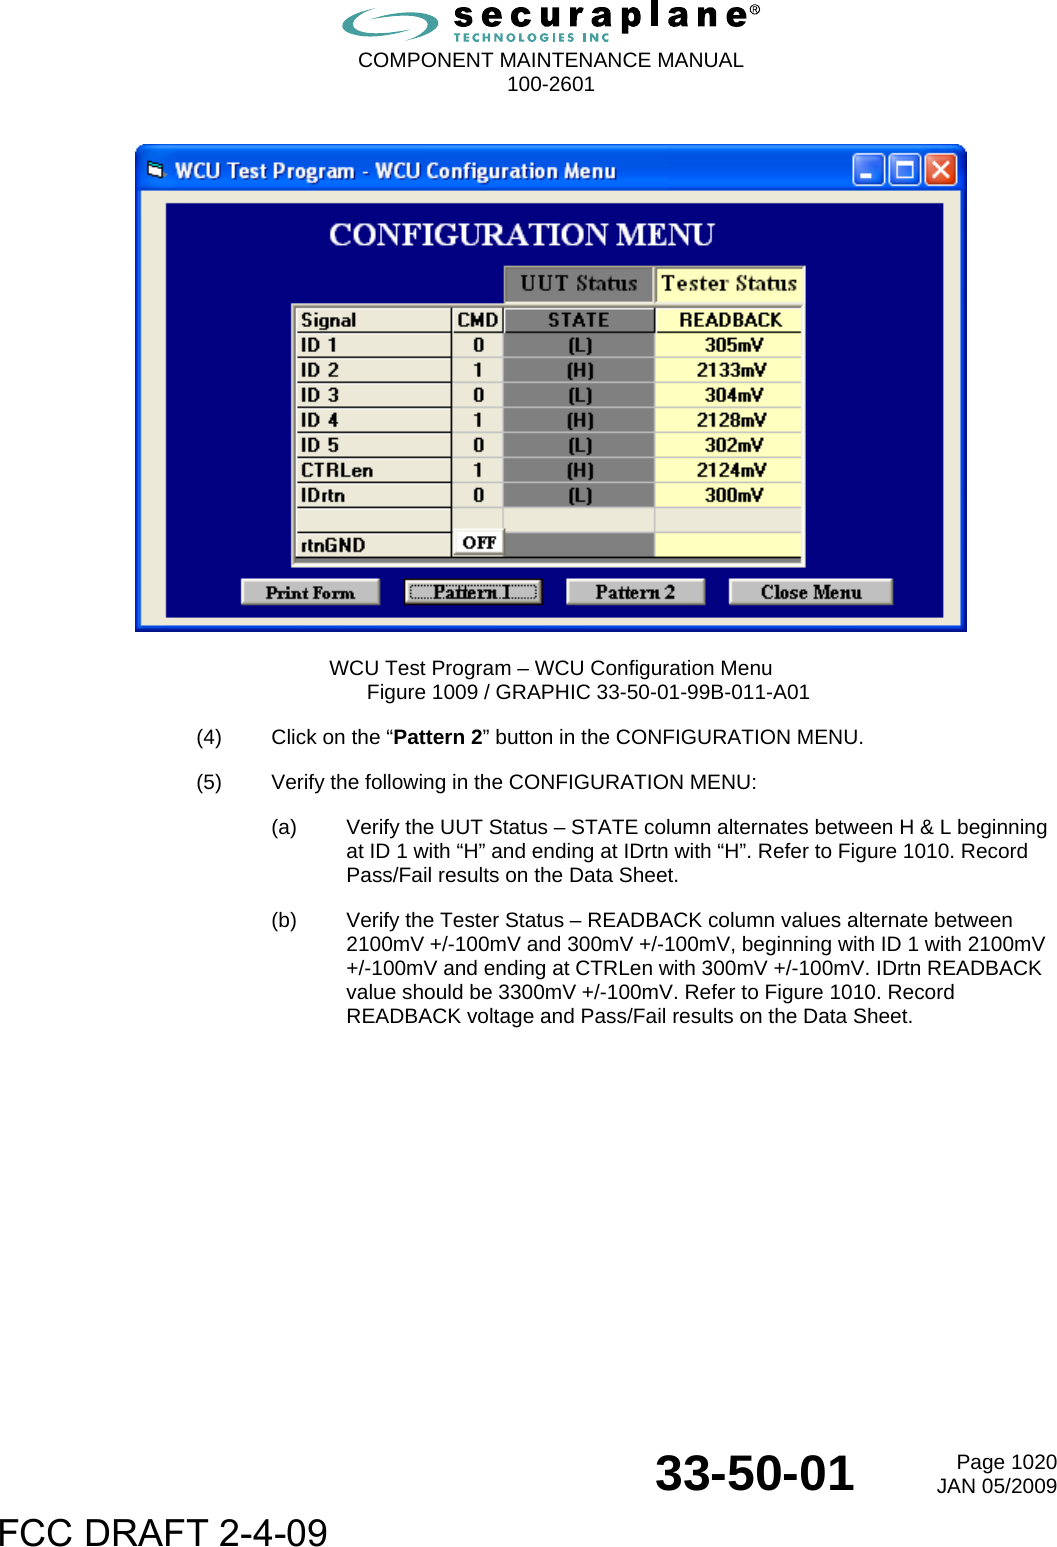  COMPONENT MAINTENANCE MANUAL  100-2601  33-50-01  Page 1020JAN 05/2009    WCU Test Program – WCU Configuration Menu Figure 1009 / GRAPHIC 33-50-01-99B-011-A01 (4)  Click on the “Pattern 2” button in the CONFIGURATION MENU. (5)  Verify the following in the CONFIGURATION MENU: (a)  Verify the UUT Status – STATE column alternates between H &amp; L beginning at ID 1 with “H” and ending at IDrtn with “H”. Refer to Figure 1010. Record Pass/Fail results on the Data Sheet. (b)  Verify the Tester Status – READBACK column values alternate between 2100mV +/-100mV and 300mV +/-100mV, beginning with ID 1 with 2100mV +/-100mV and ending at CTRLen with 300mV +/-100mV. IDrtn READBACK value should be 3300mV +/-100mV. Refer to Figure 1010. Record READBACK voltage and Pass/Fail results on the Data Sheet. FCC DRAFT 2-4-09